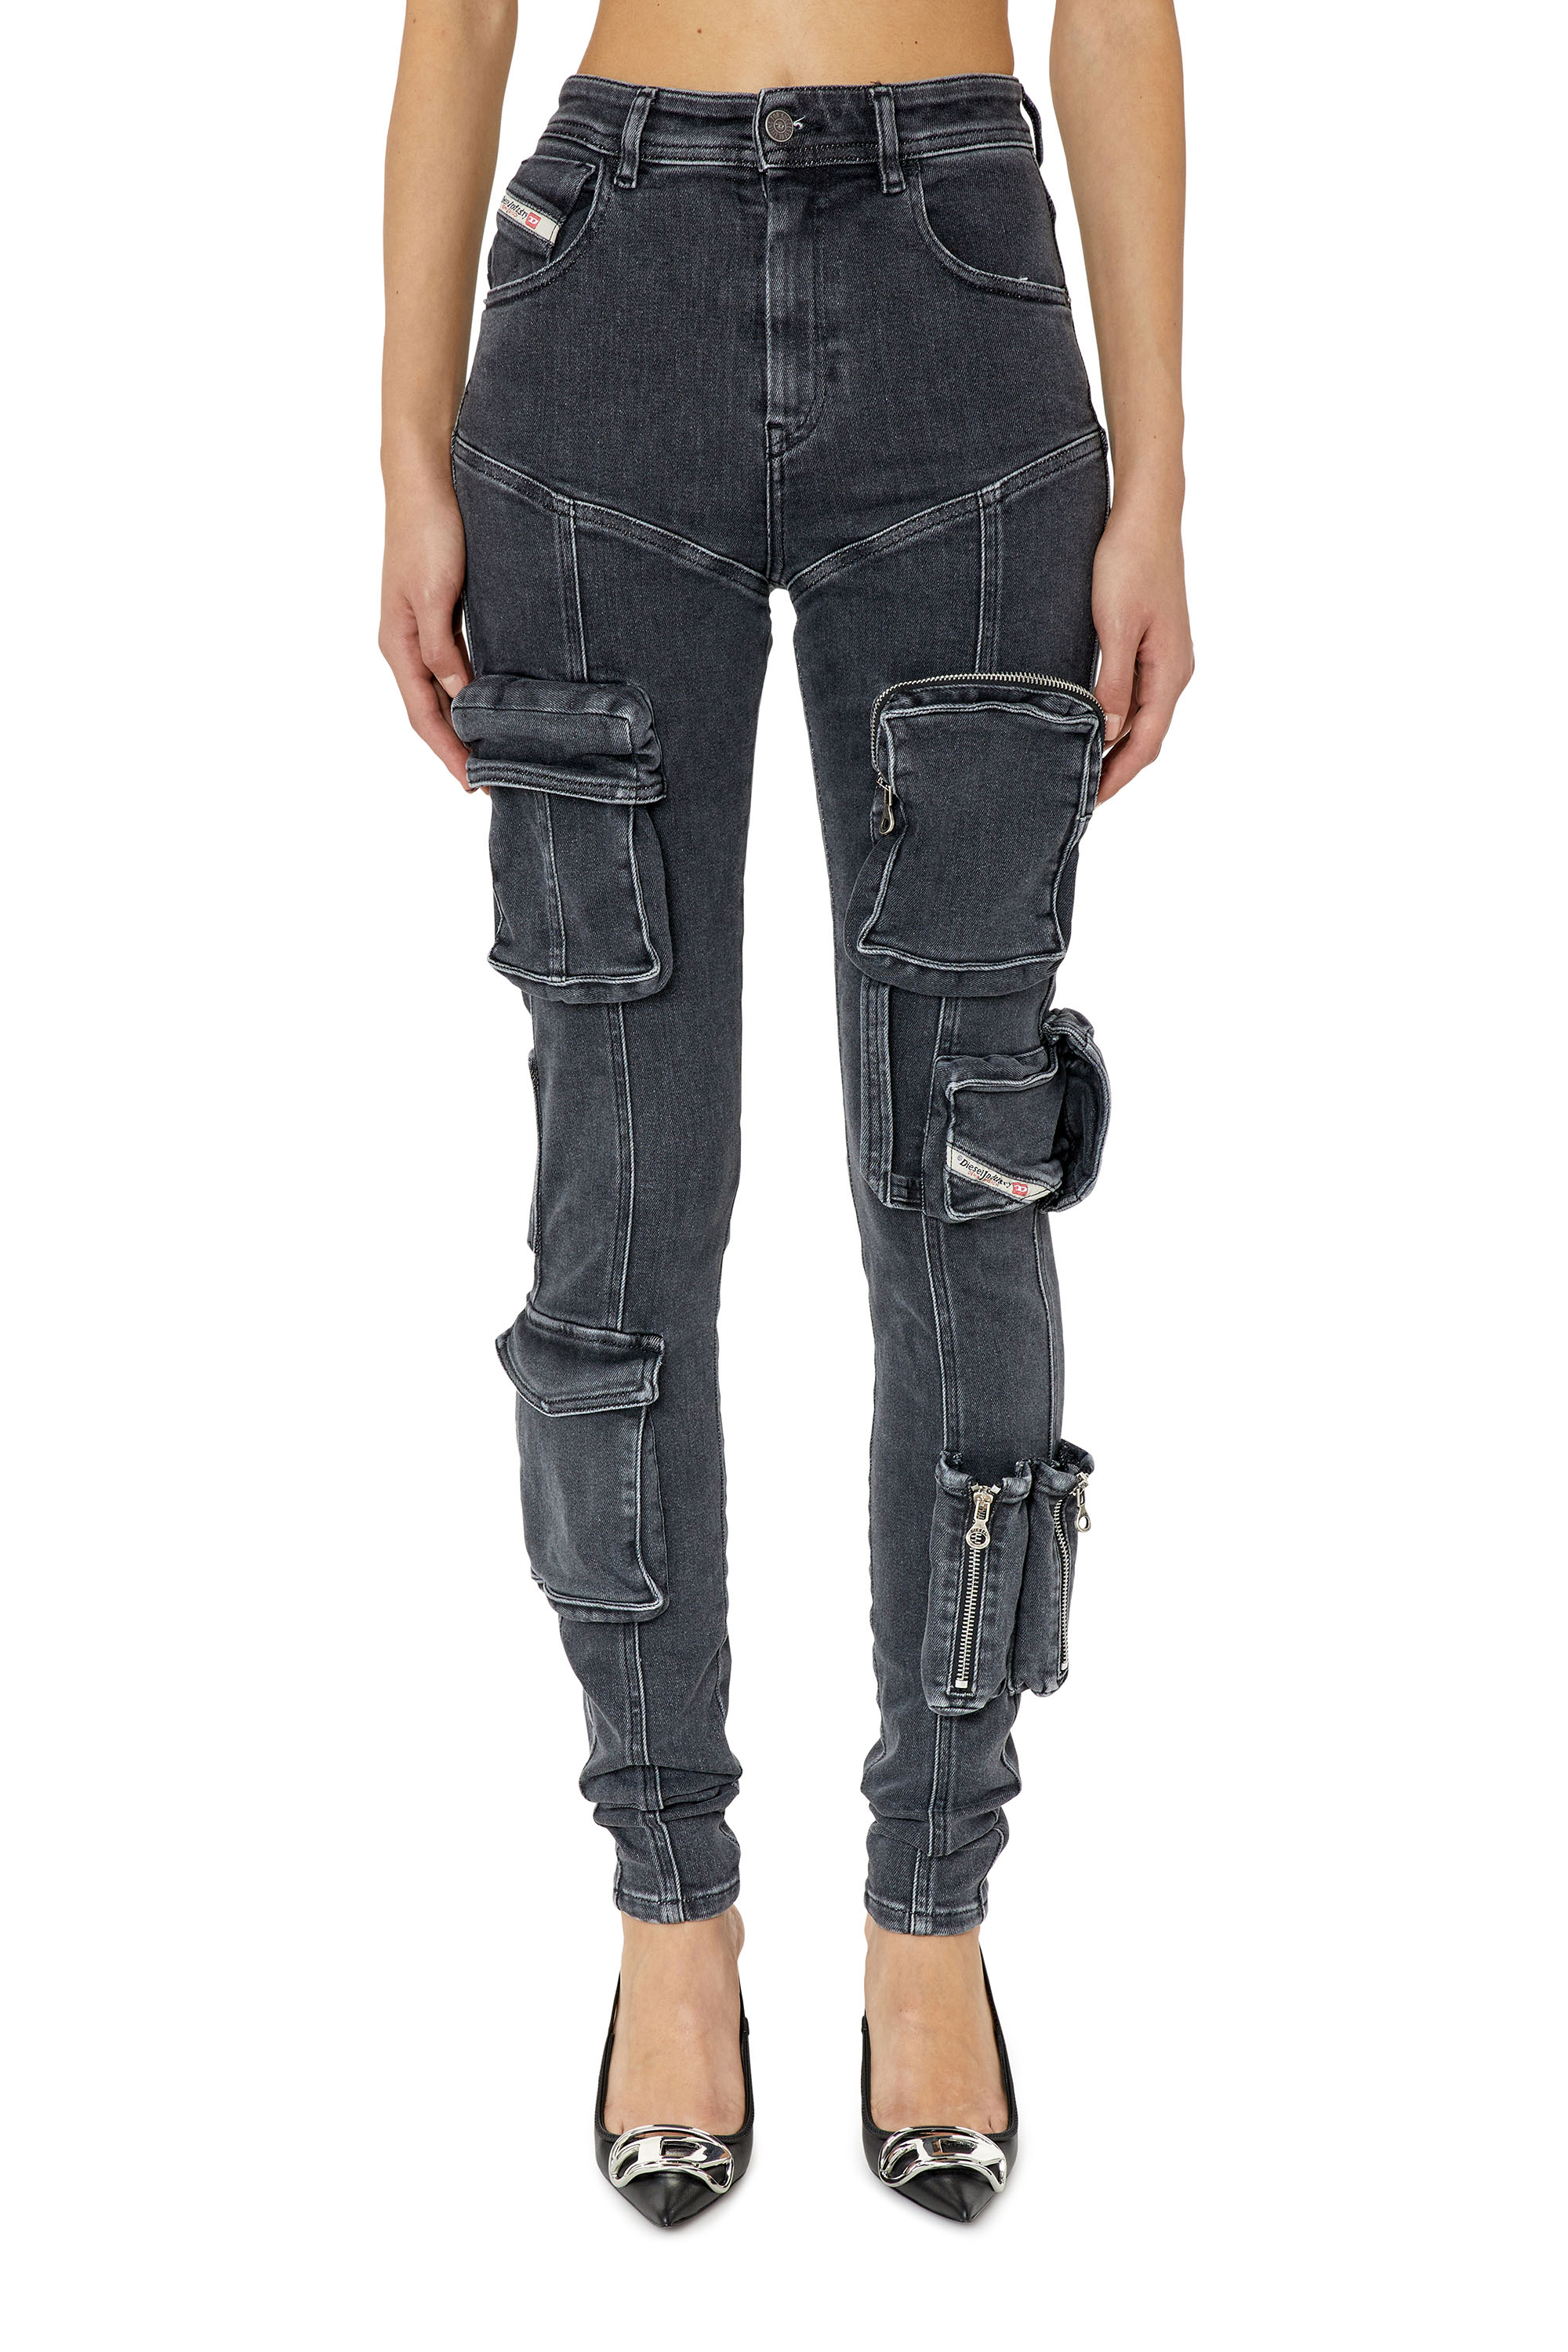 Women's Jeans and Apparel: Discover our Collection | Diesel®